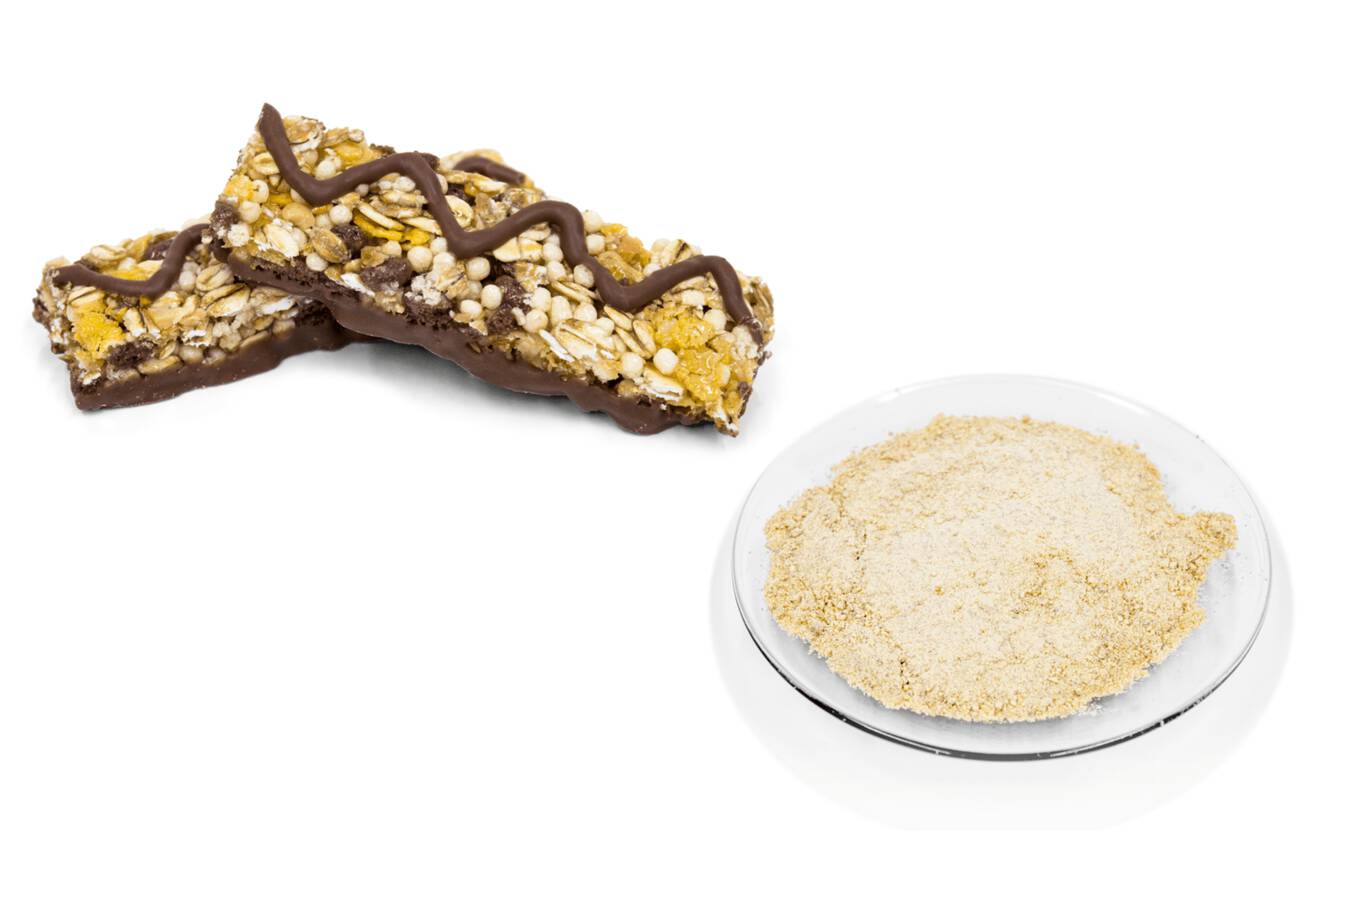 Laboratory sample of a comminuted cereal bar